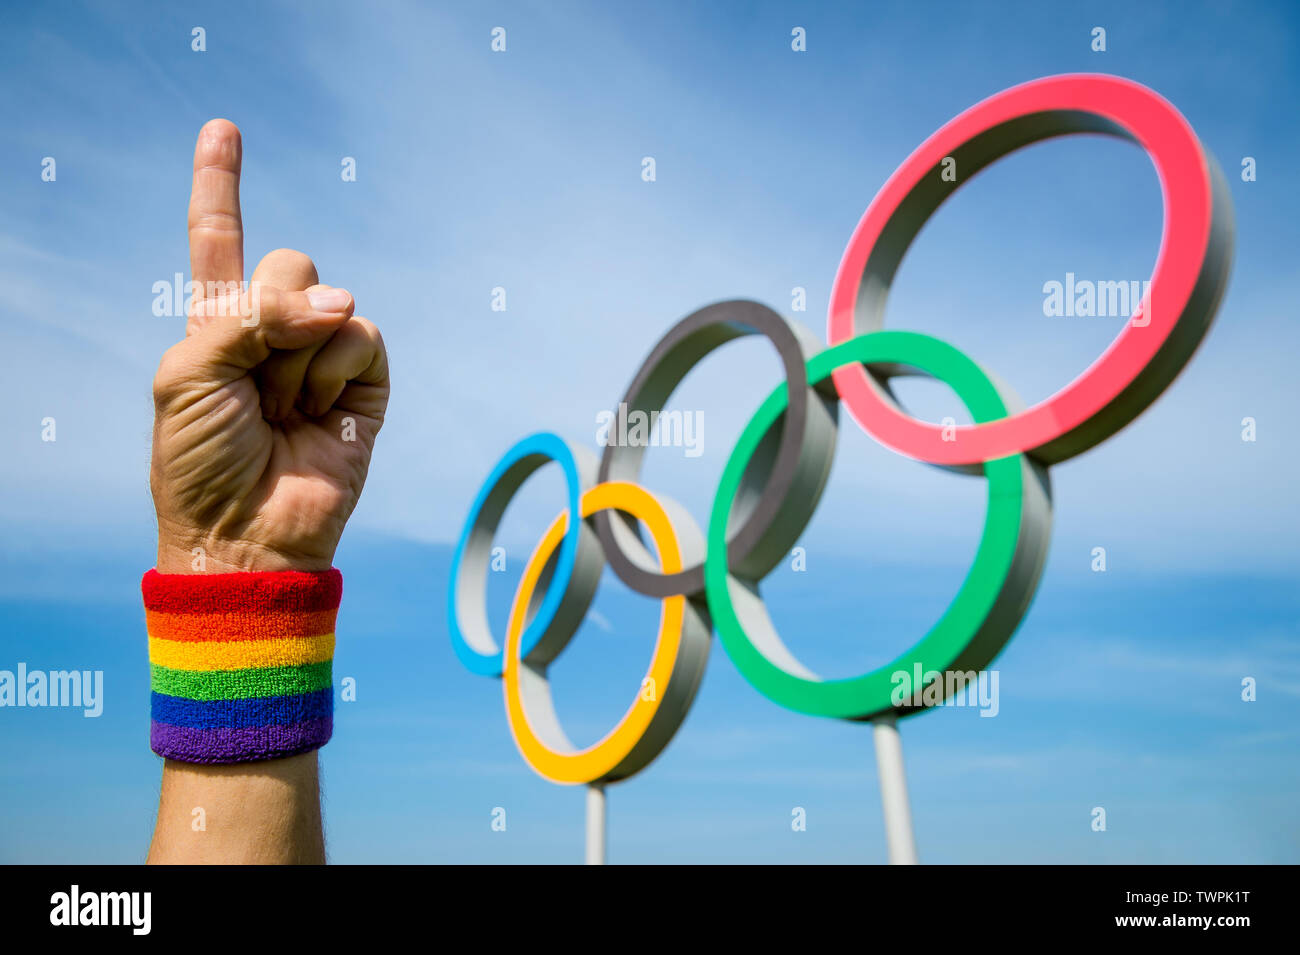 LONDON - MAY 4, 2019: A hand wearing gay pride rainbow colored wristband points to the sky with a number one gesture in front of Olympic Rings. Stock Photo